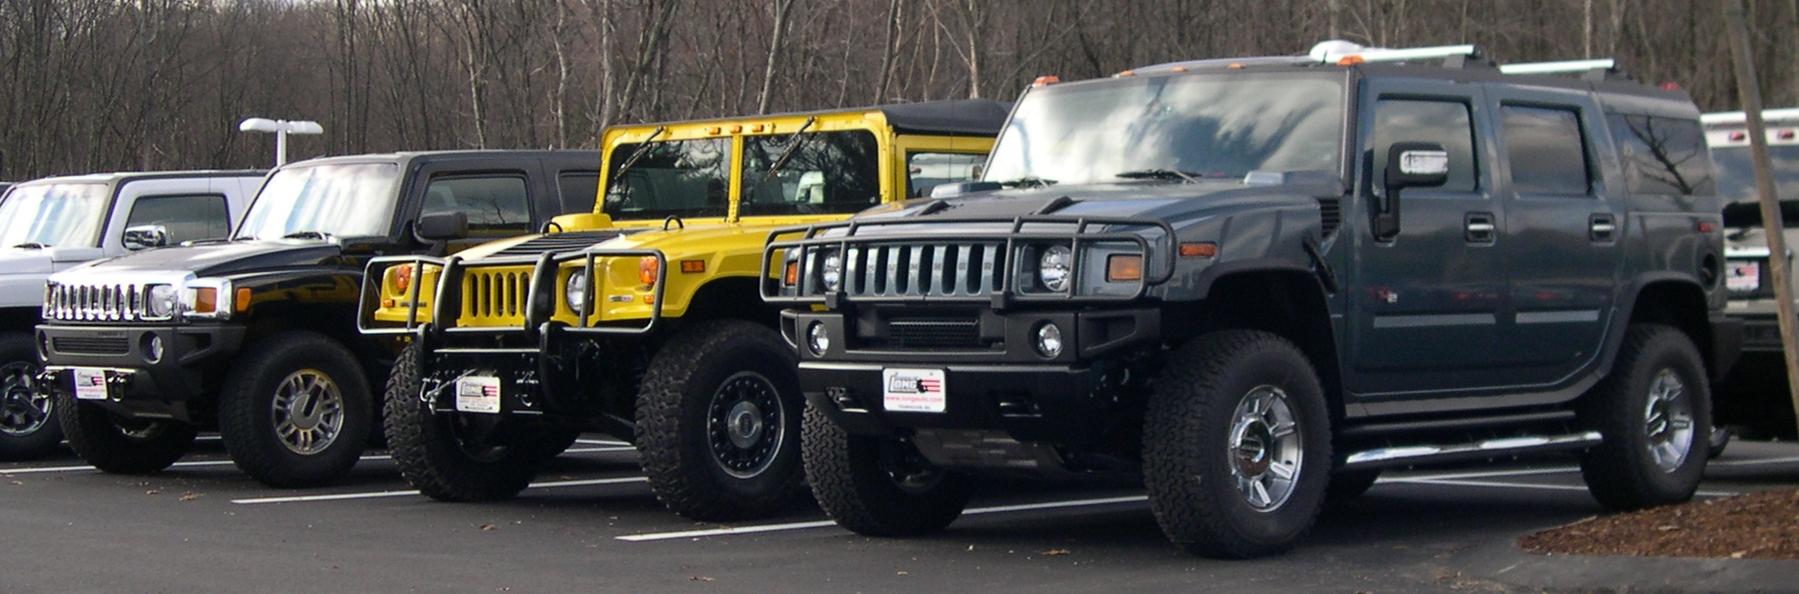 Hummer H2, H1 and H3 in 2006